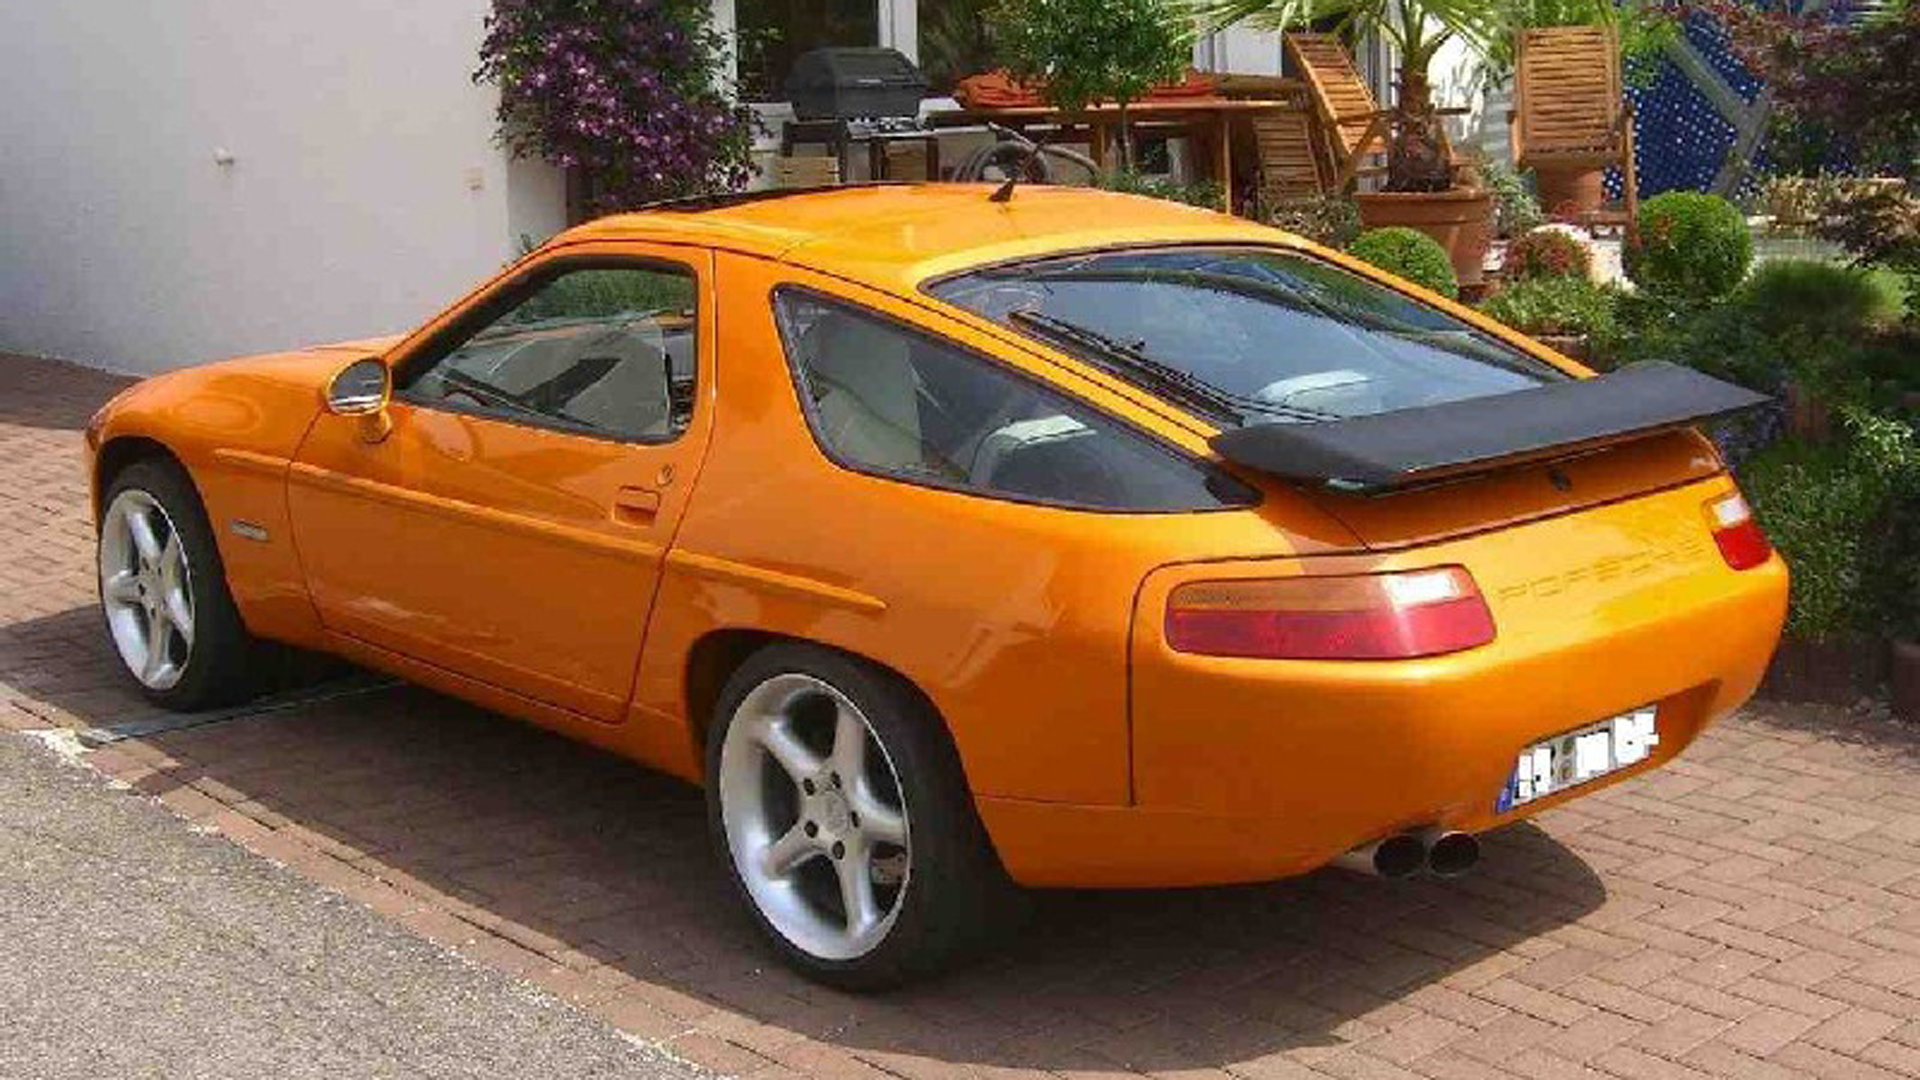 Porsche 996 Mods 9 Images - I Need A Subwoofer What You Guys Gave Rennlist,...